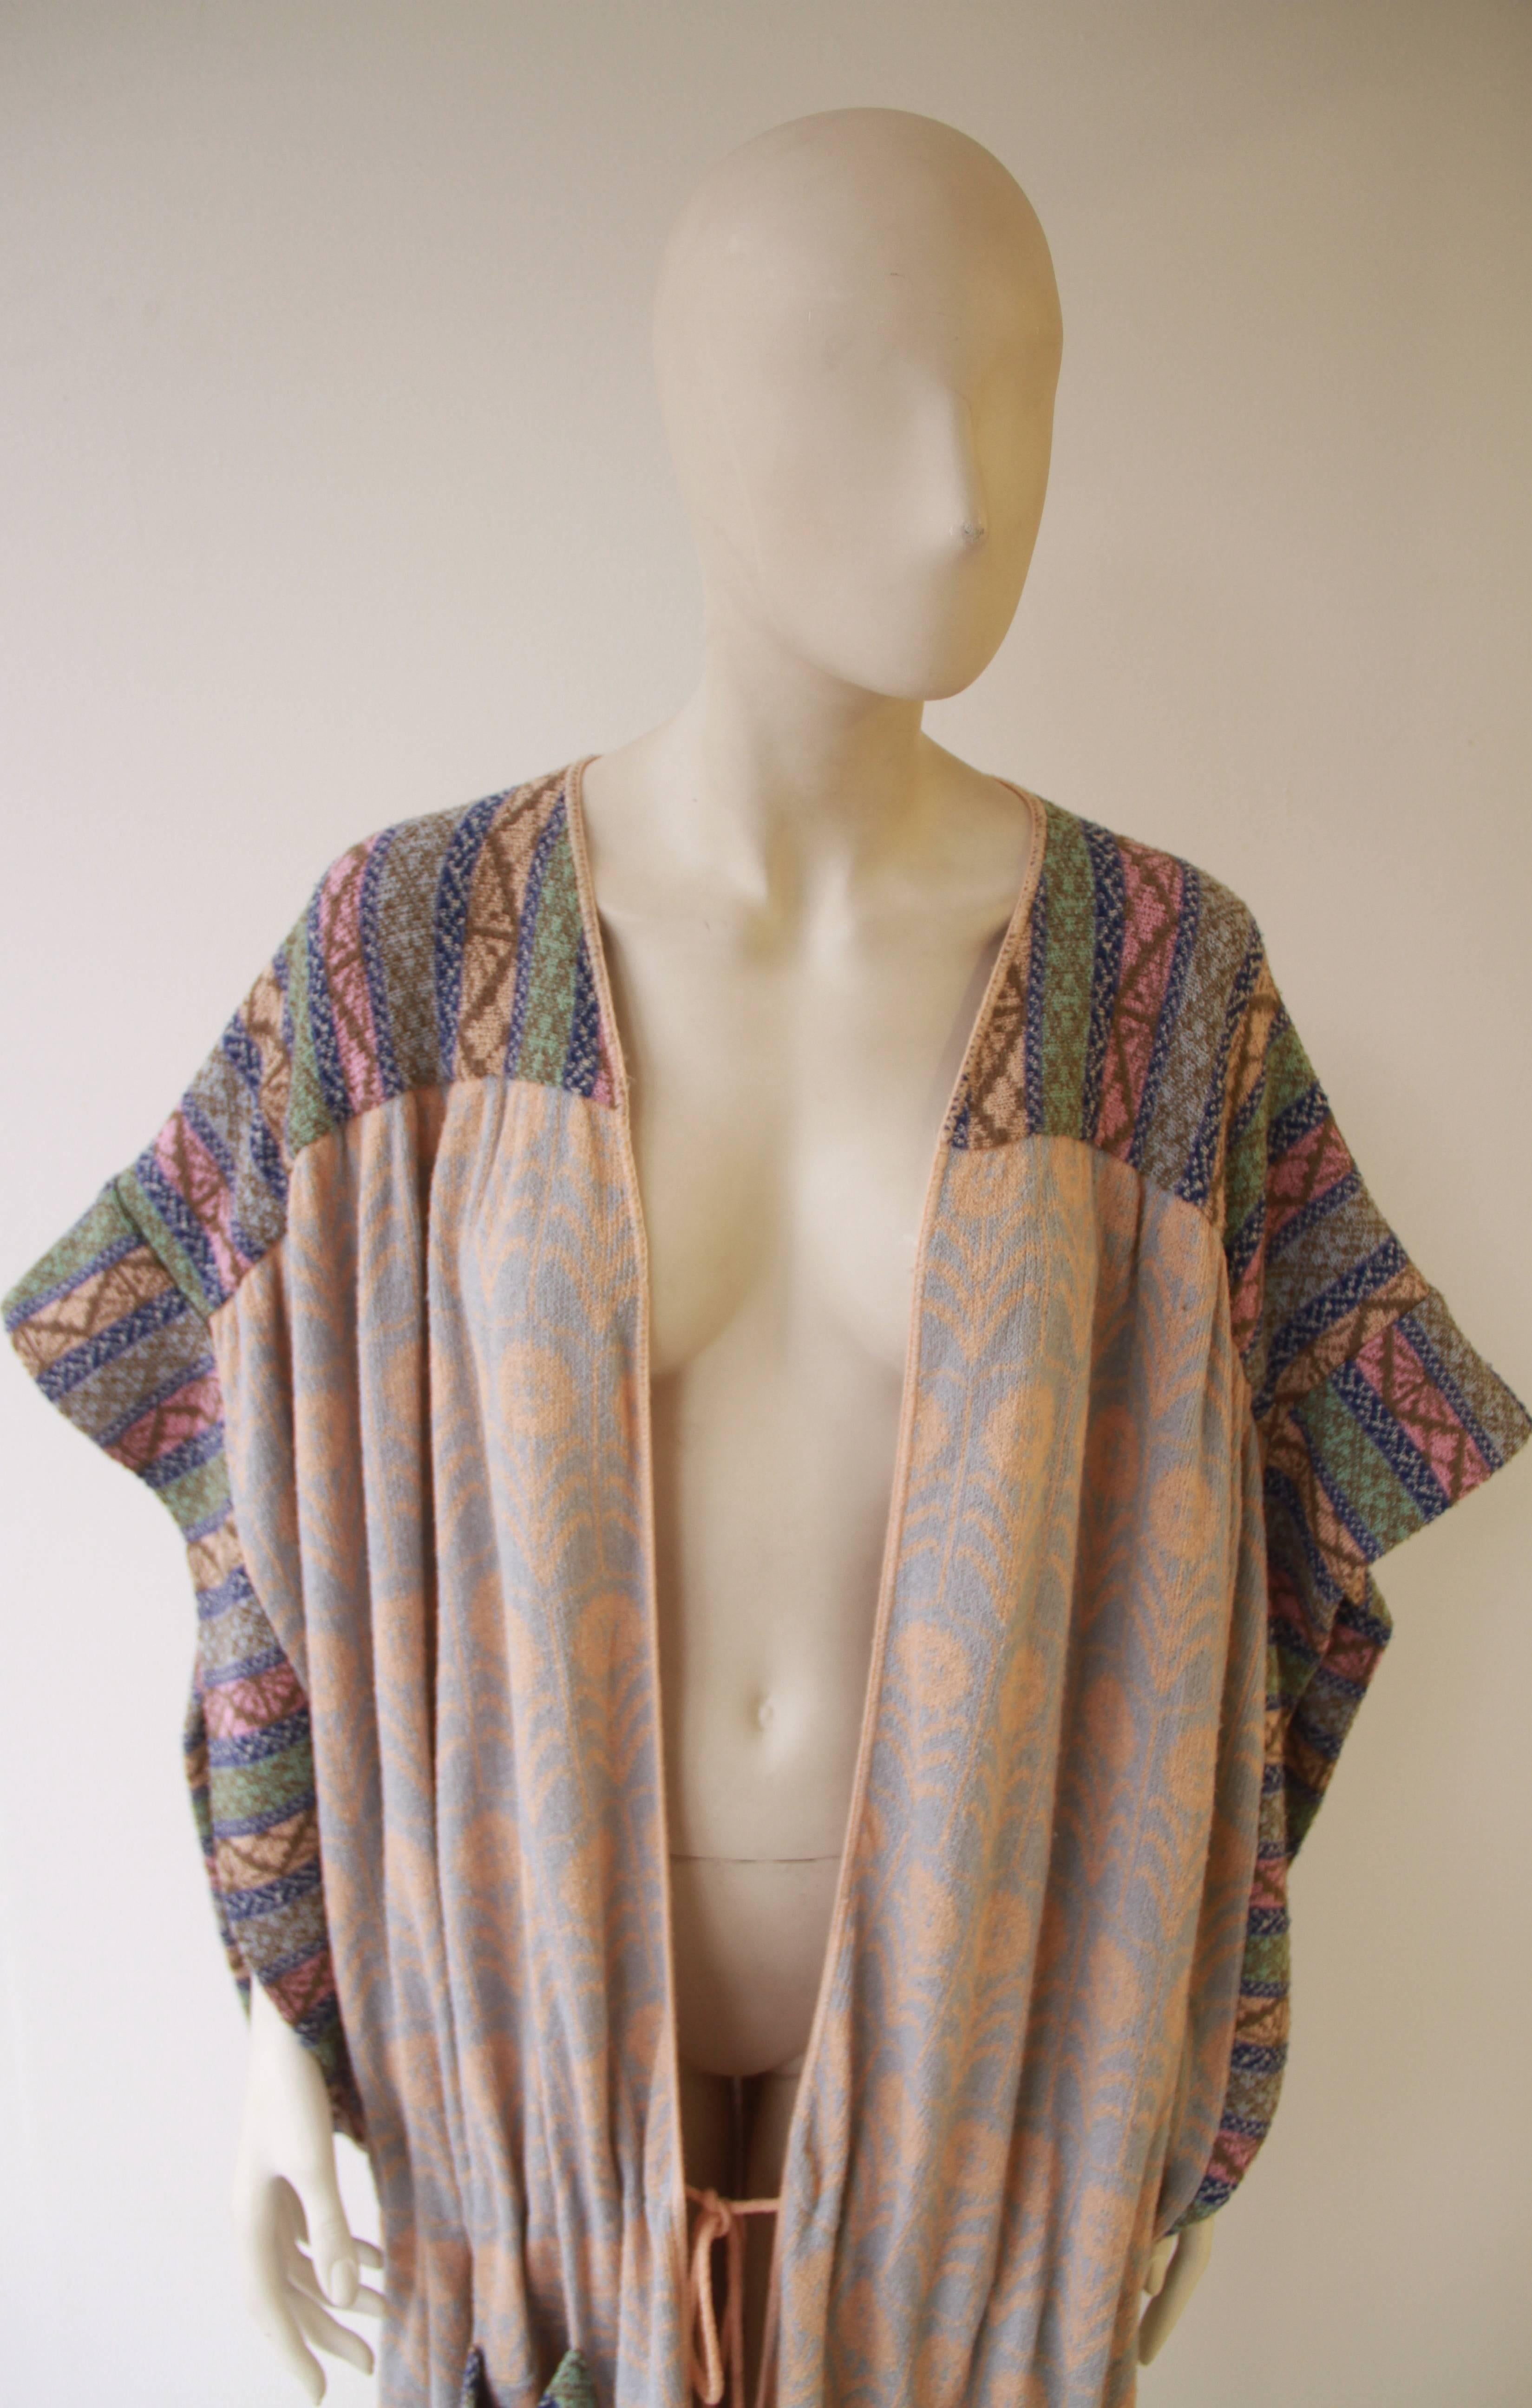 Museum quality and extremely rare Bill Gibb and Kaffe Fassett designed knitted voluminous cotton coat from 1975. The coat is knitted in a pale blue and peach pattern, with a multi-coloured knitted trim.

A similar shorter piece is part of the